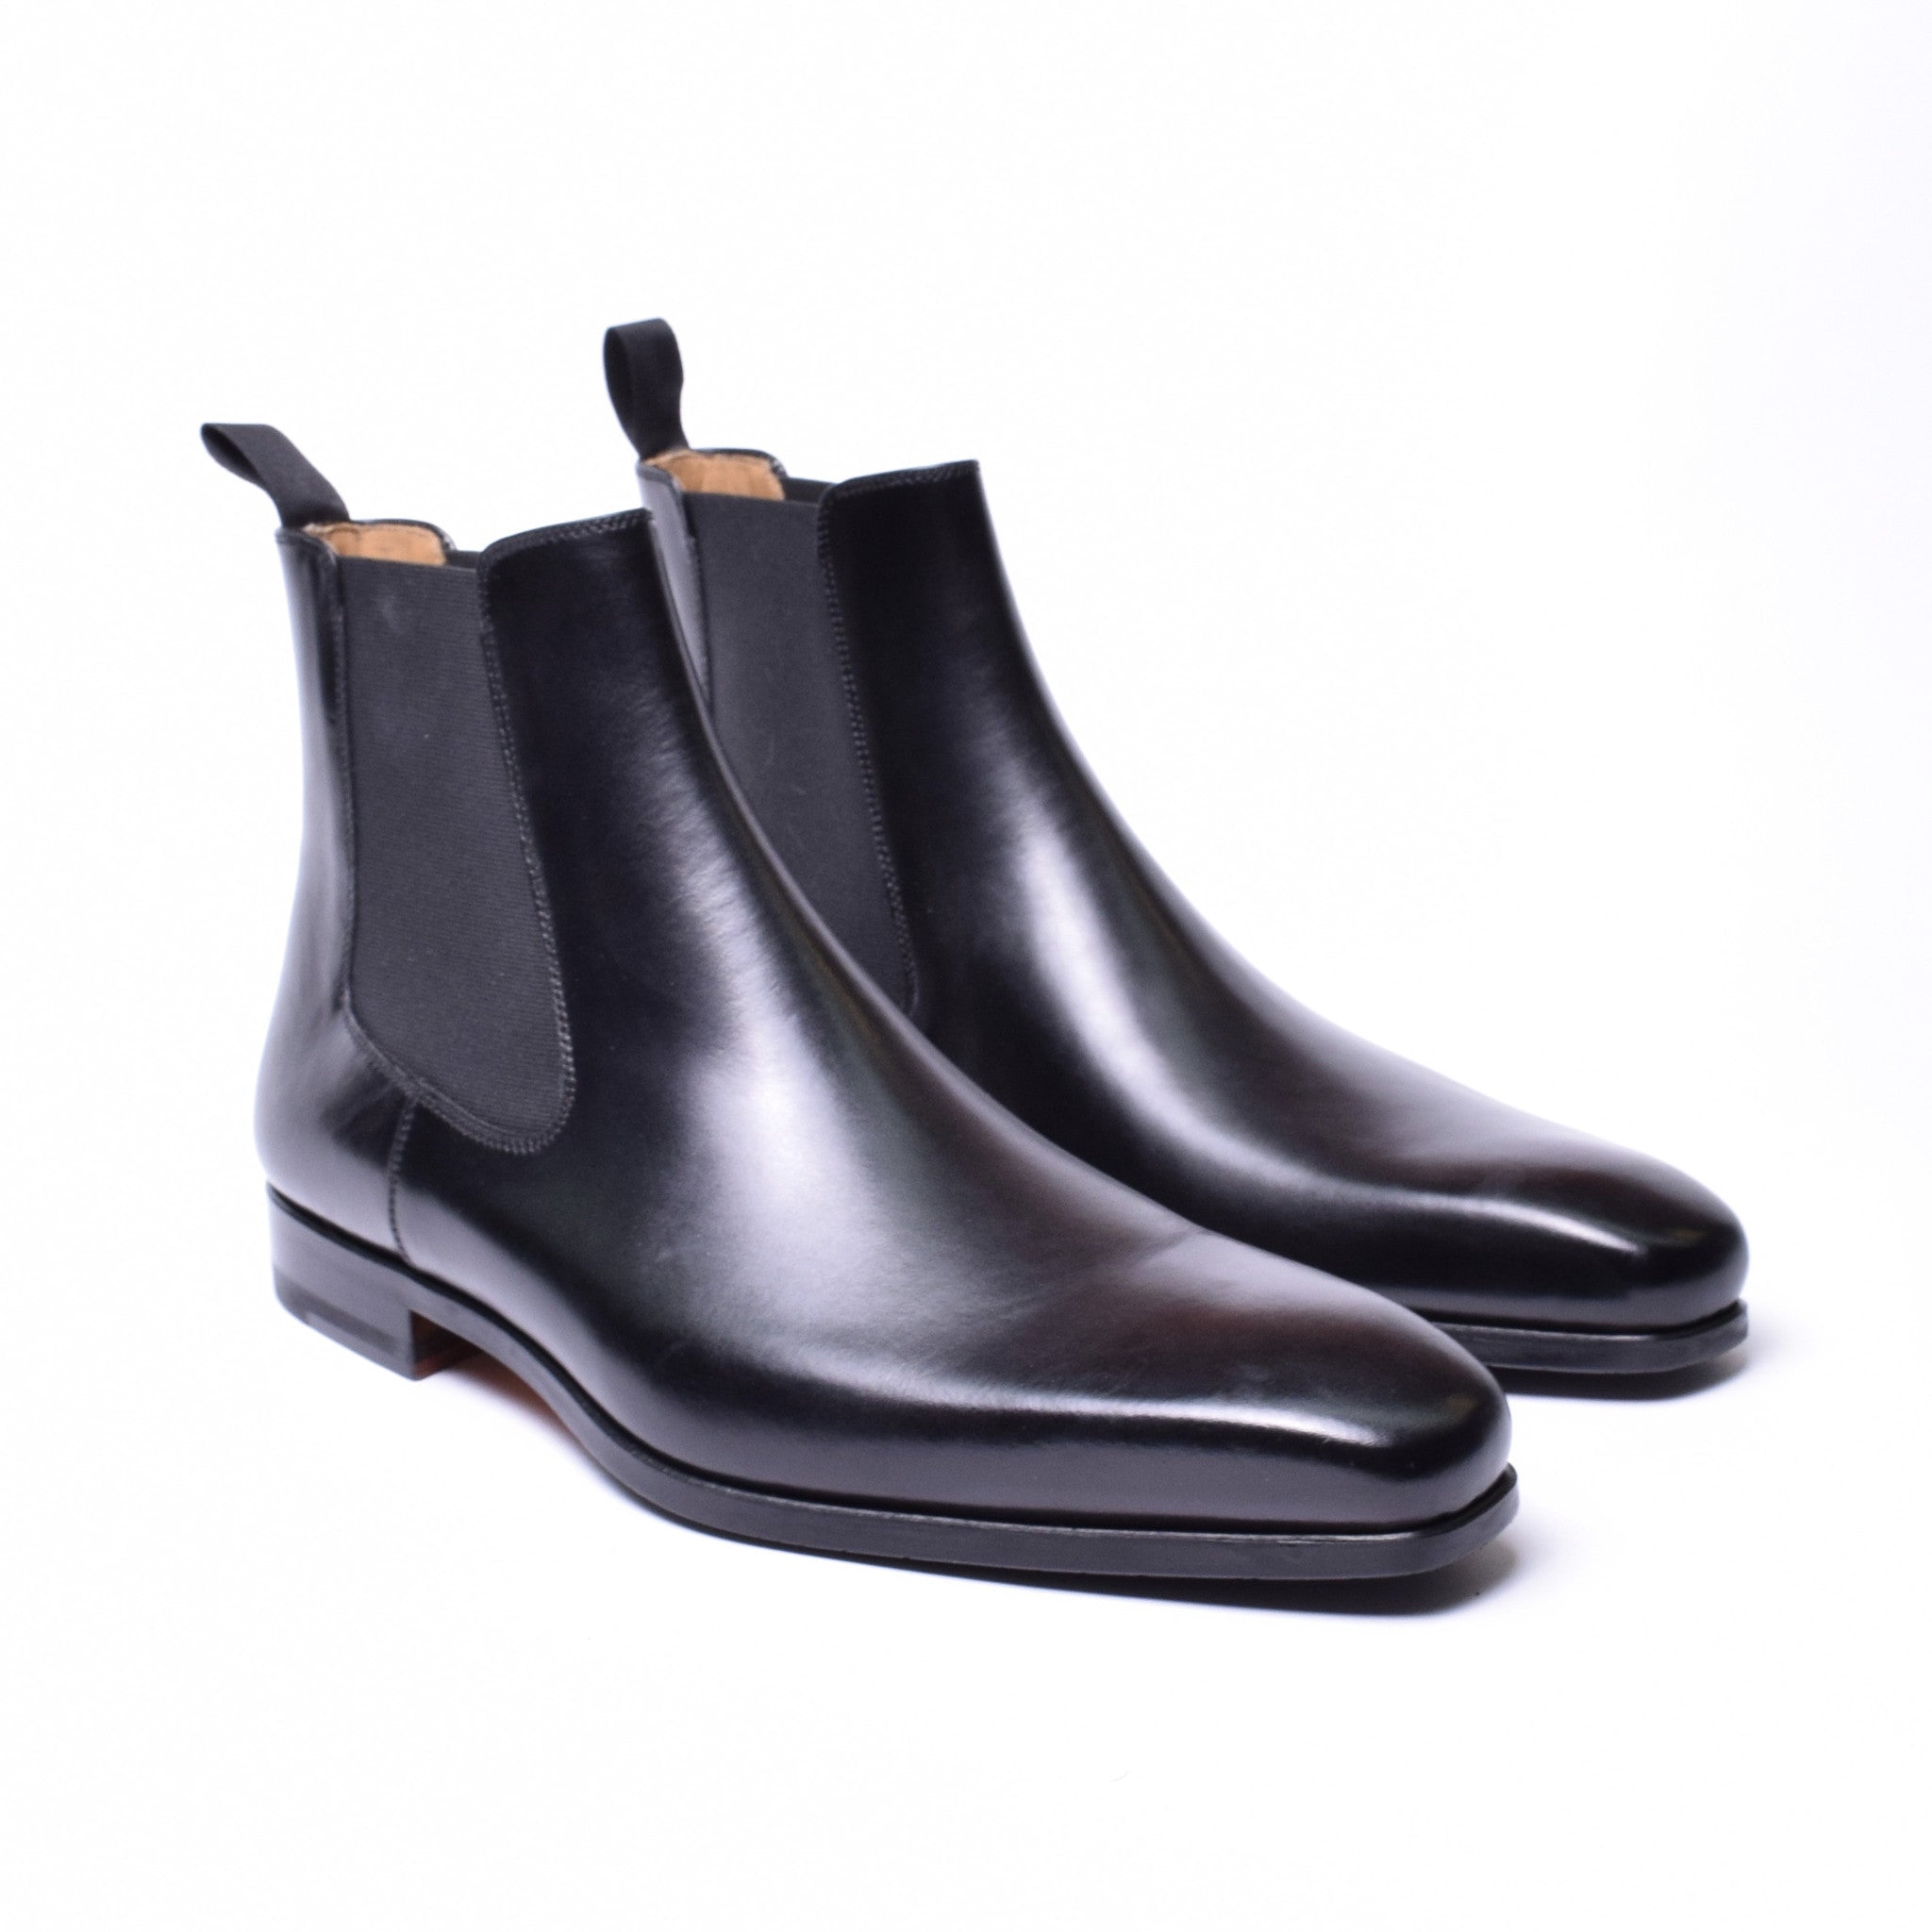 Rugged Urban Style: Jonathan Leather Chelsea Boot Magnanni